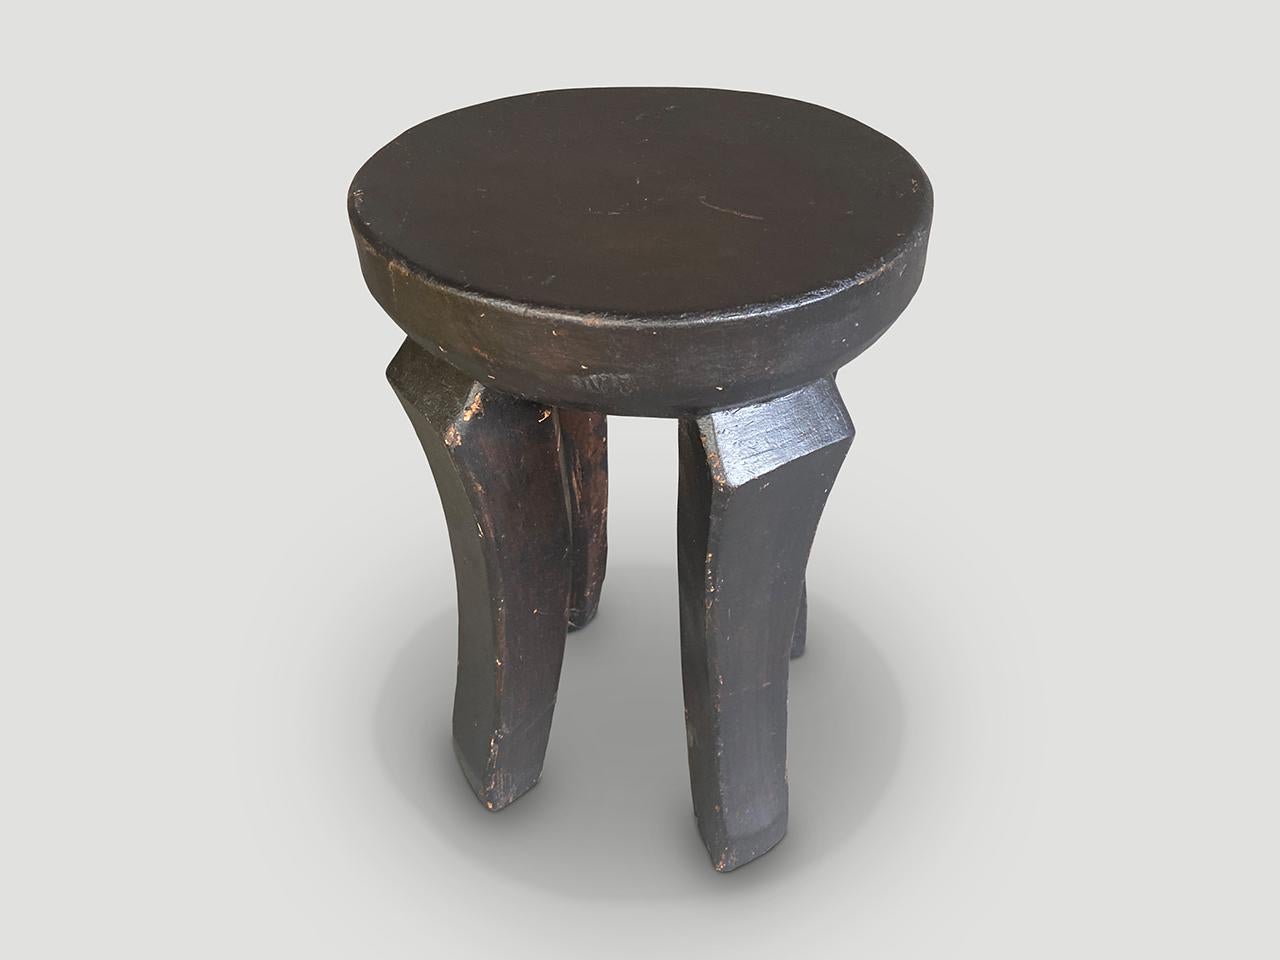 Primitive Andrianna Shamaris African Side Table or Stool